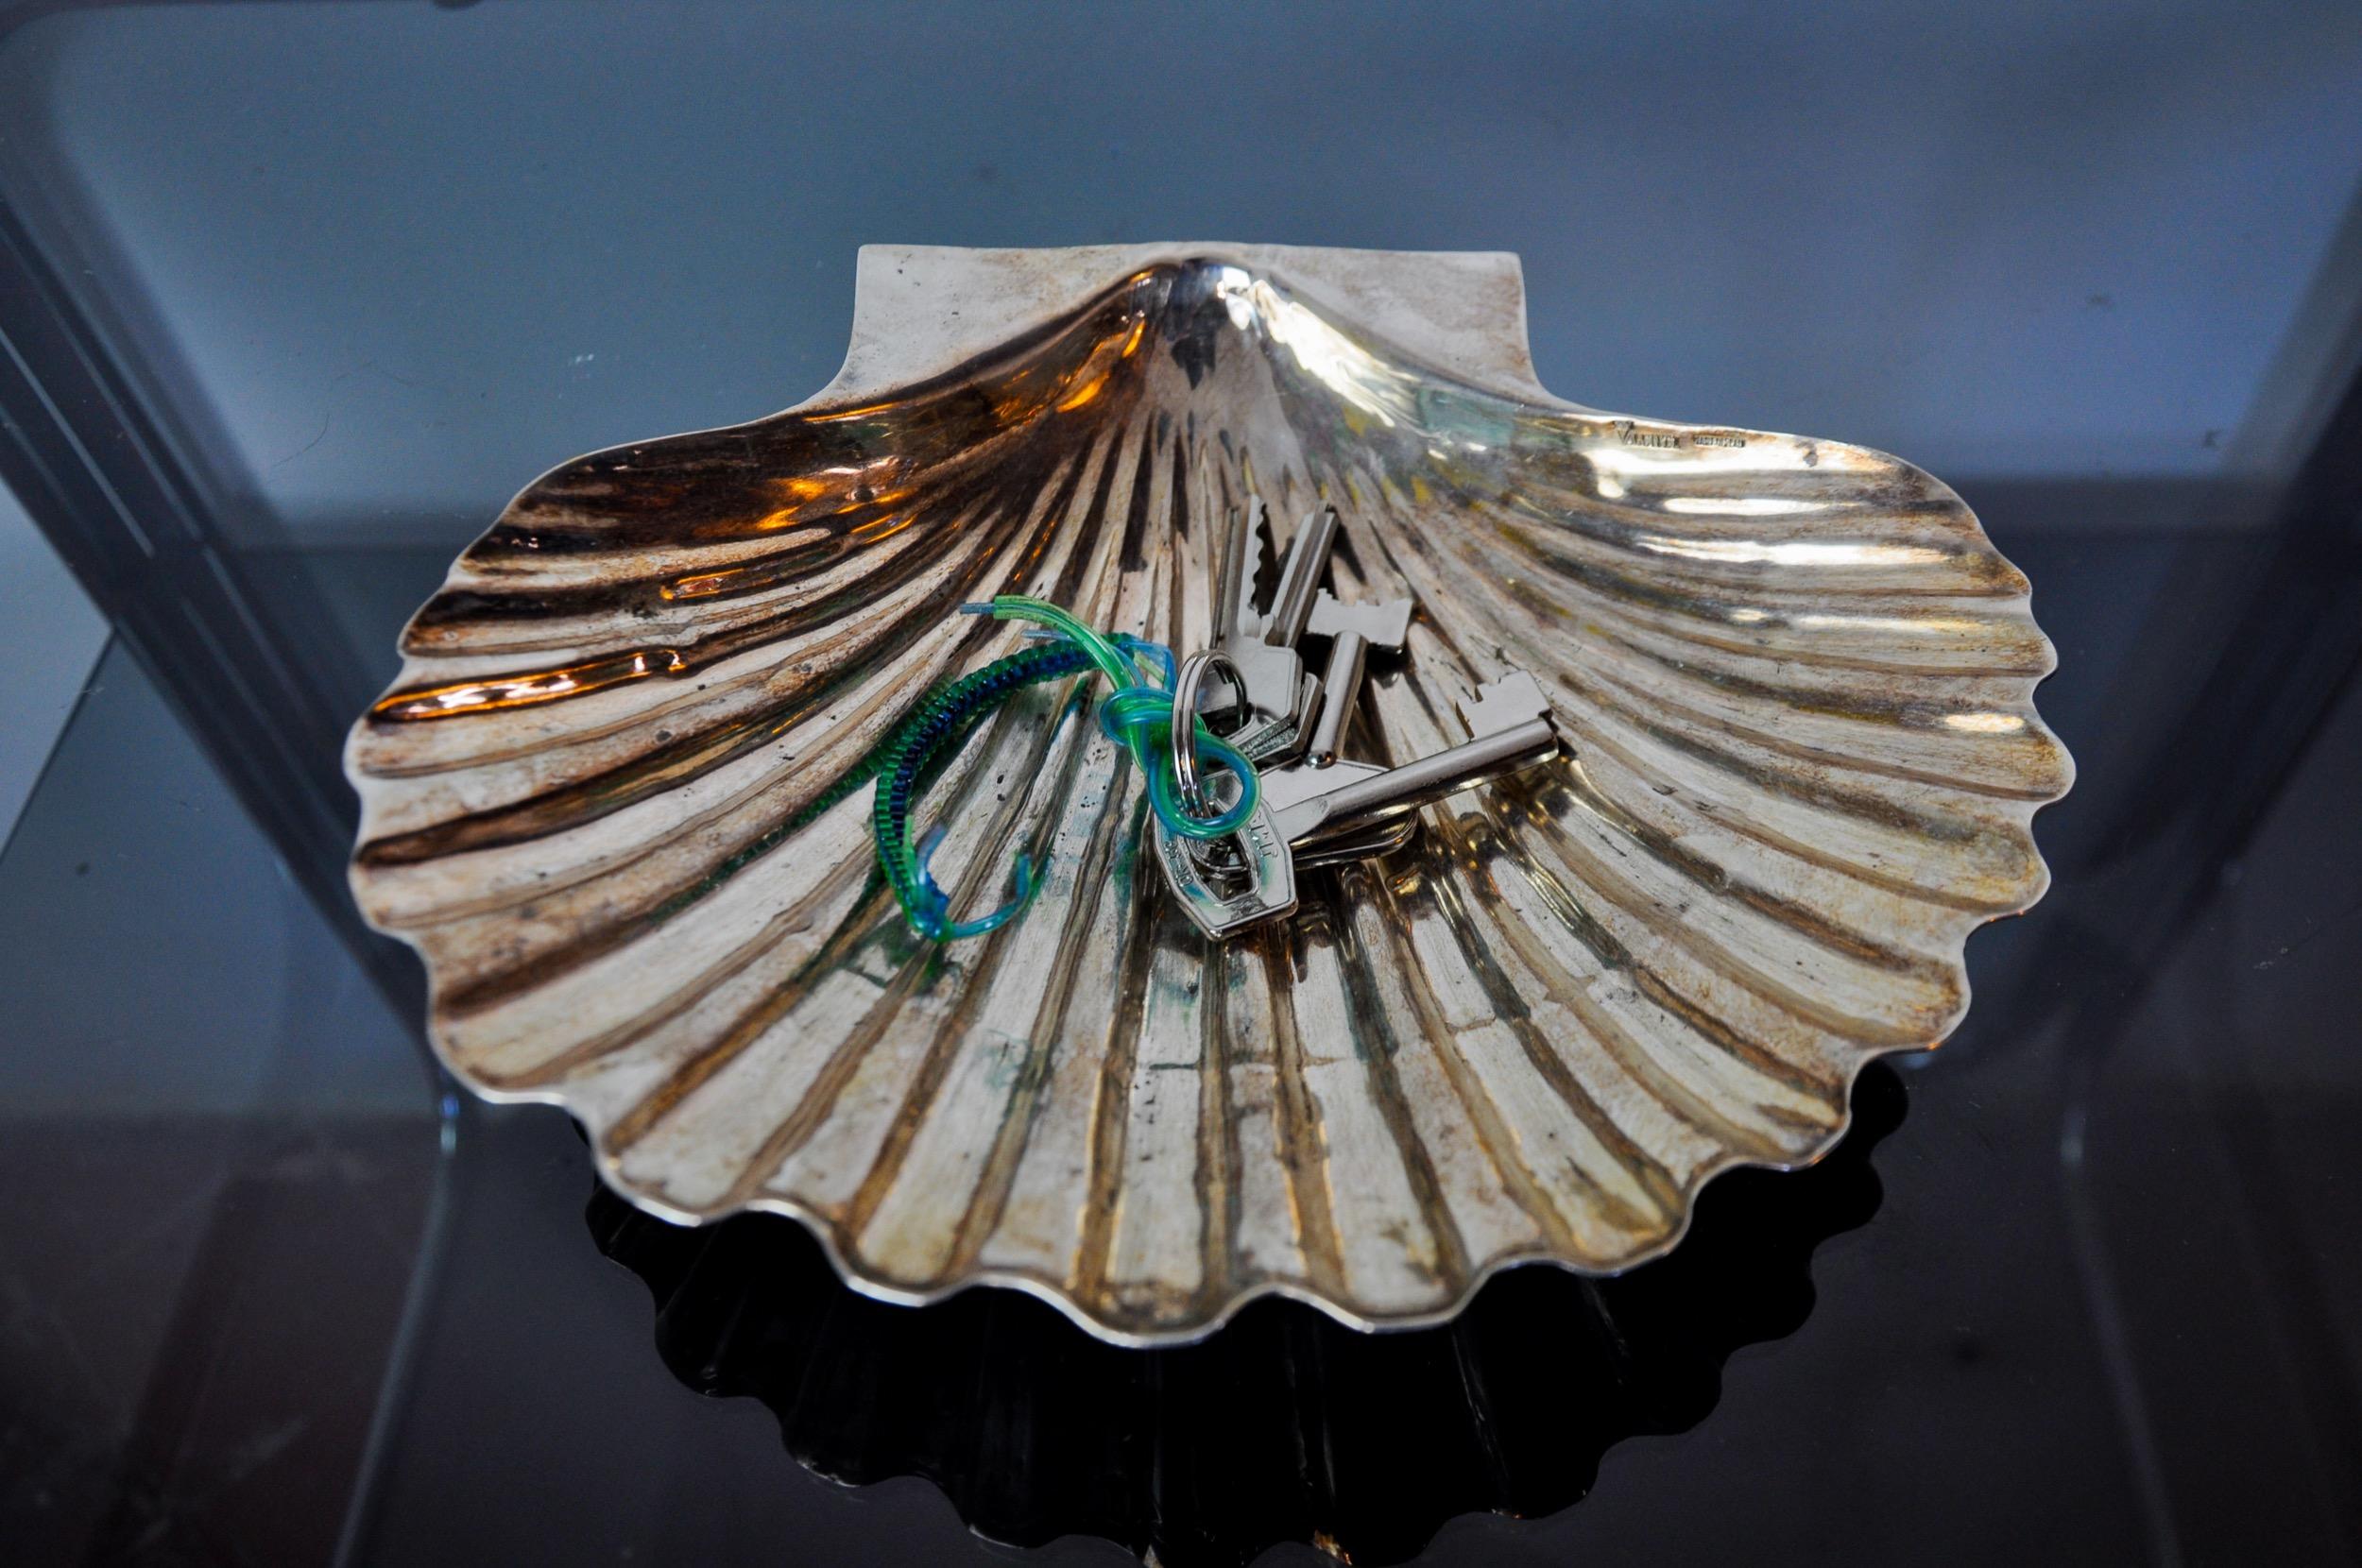 Superb and large shell empty pocket designed by Valentin in Spain in the 1970s. Silver metal structure representing a scallop shell, symbol of love and beauty since antiquity. Superb designer object that will decorate your interior wonderfully. Very